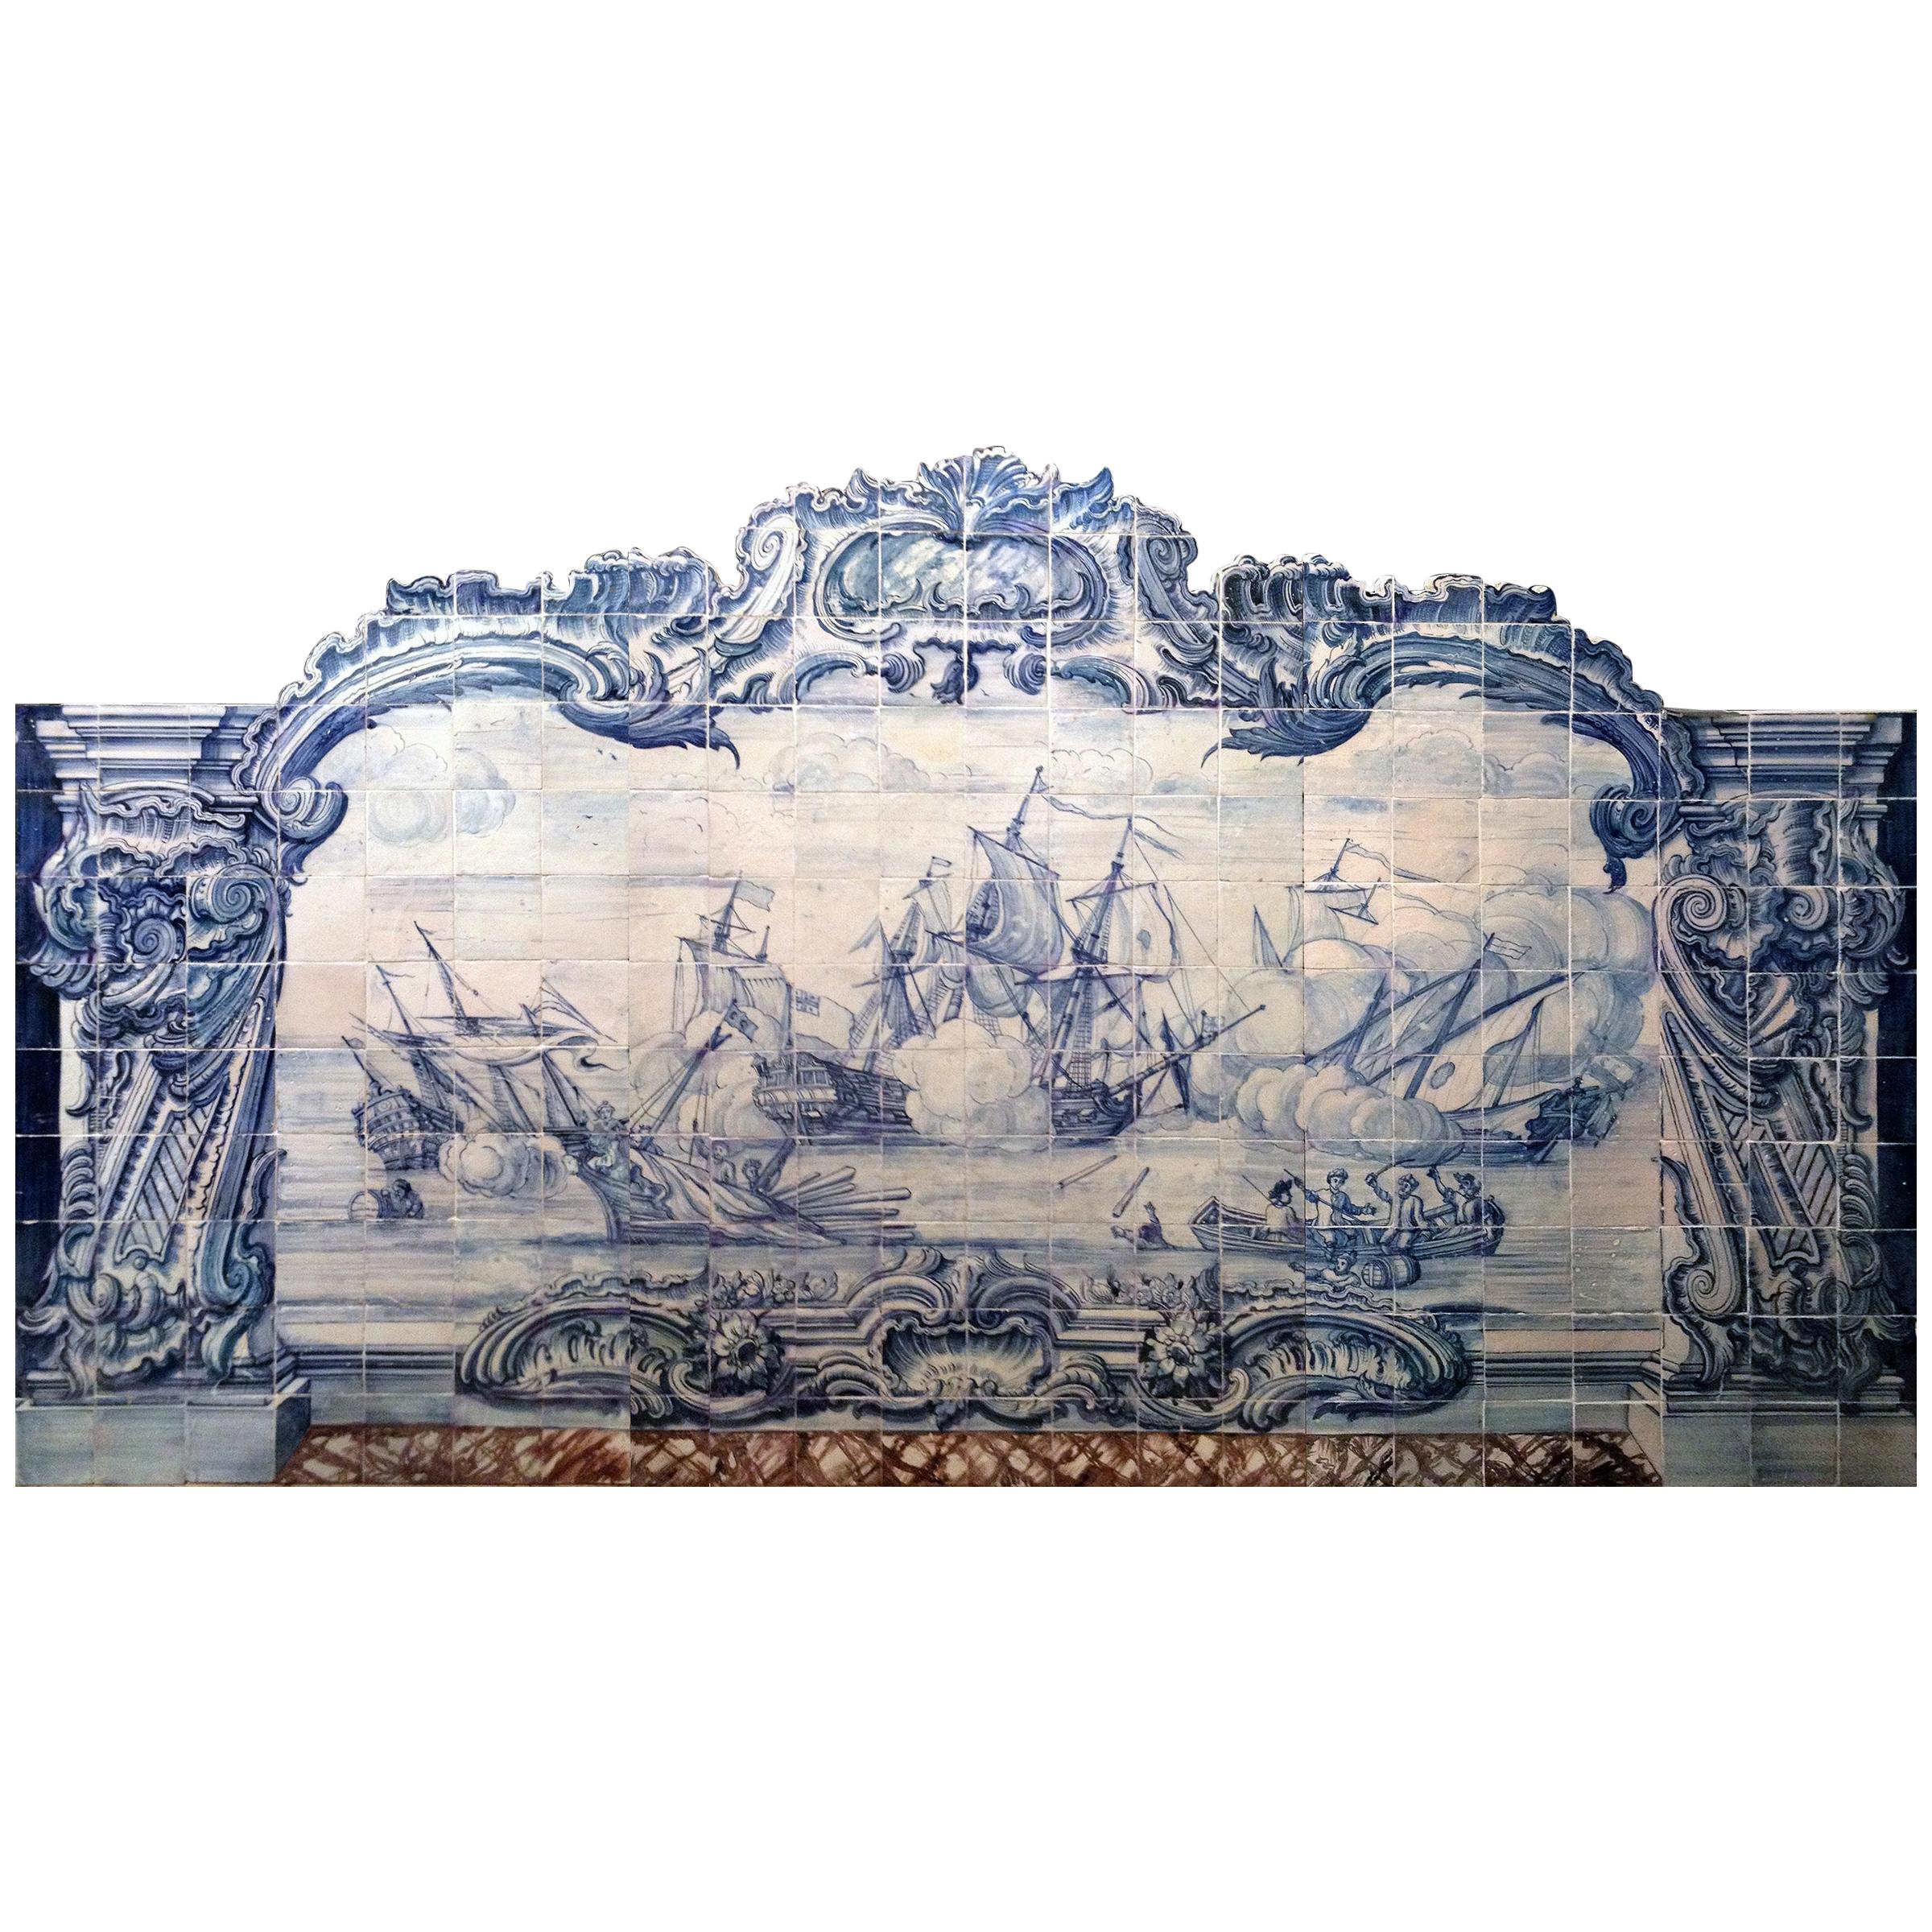 18th Century Portuguese Tiles Mural with Navy Battle in Blue For Sale